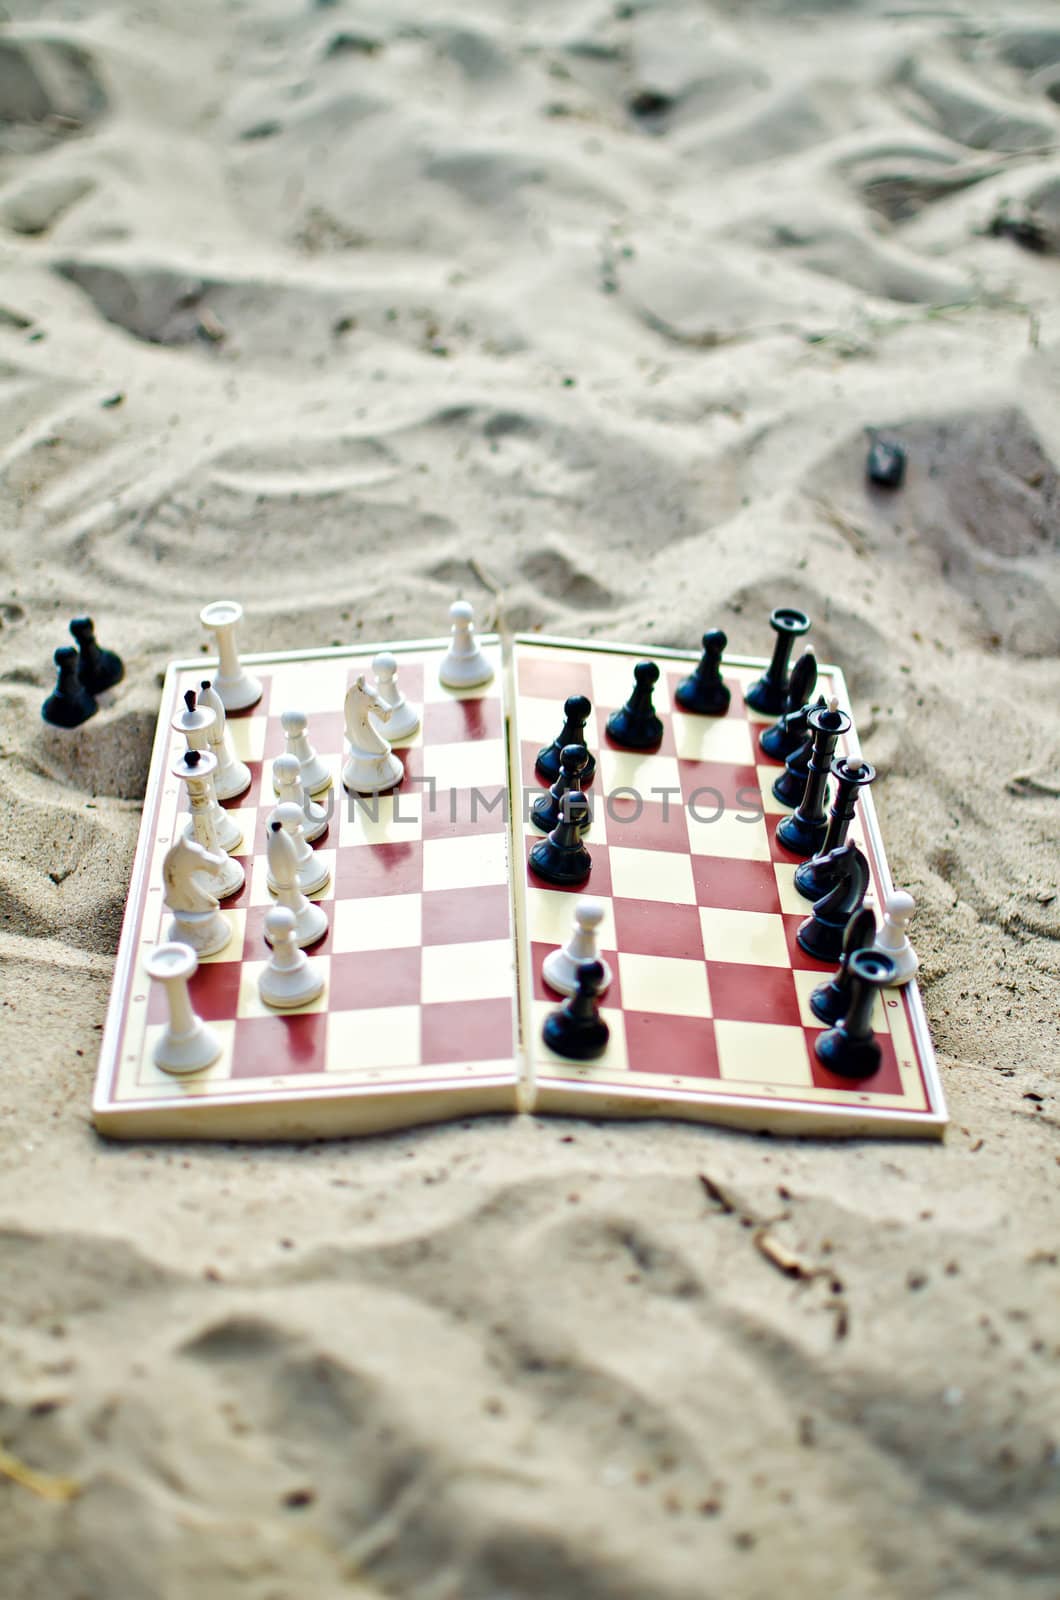 Chessboard with figures on it on the sand